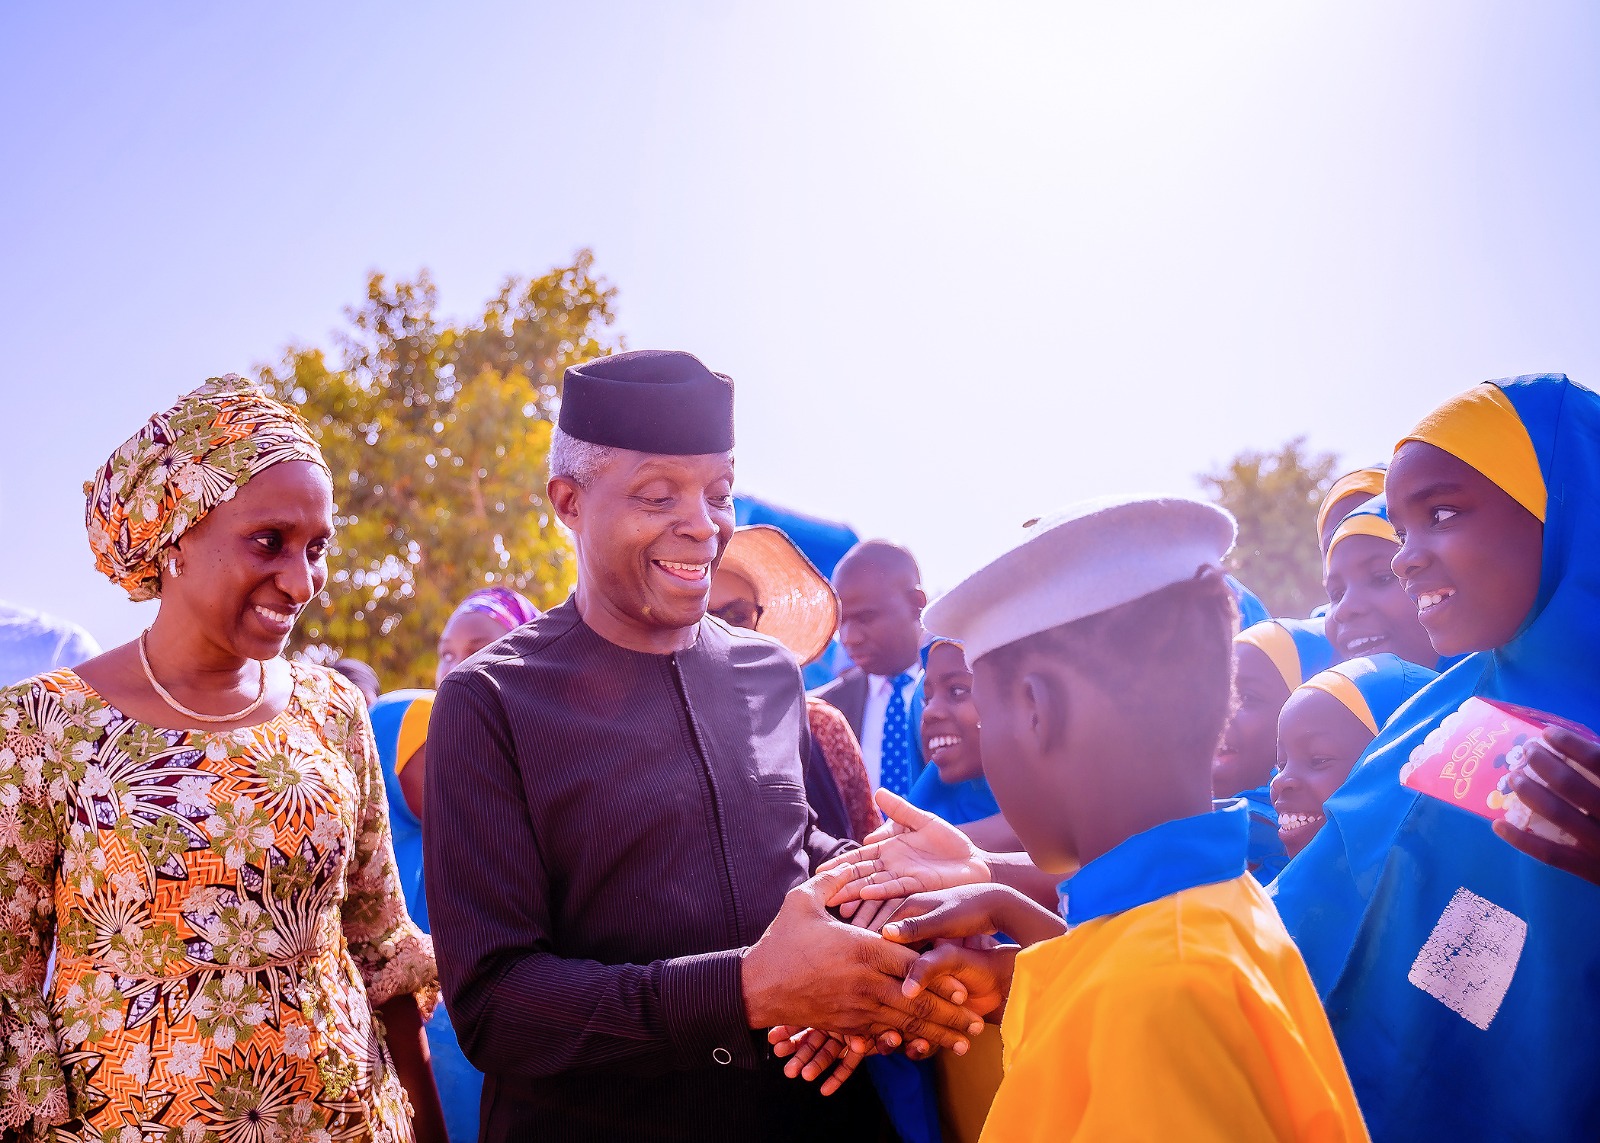 VP Osinbajo Celebrates His 66th Birthday With Orphans At The Northeast Children’s Trust Learning Centre In Maiduguri, Borno State On 08/03/2023